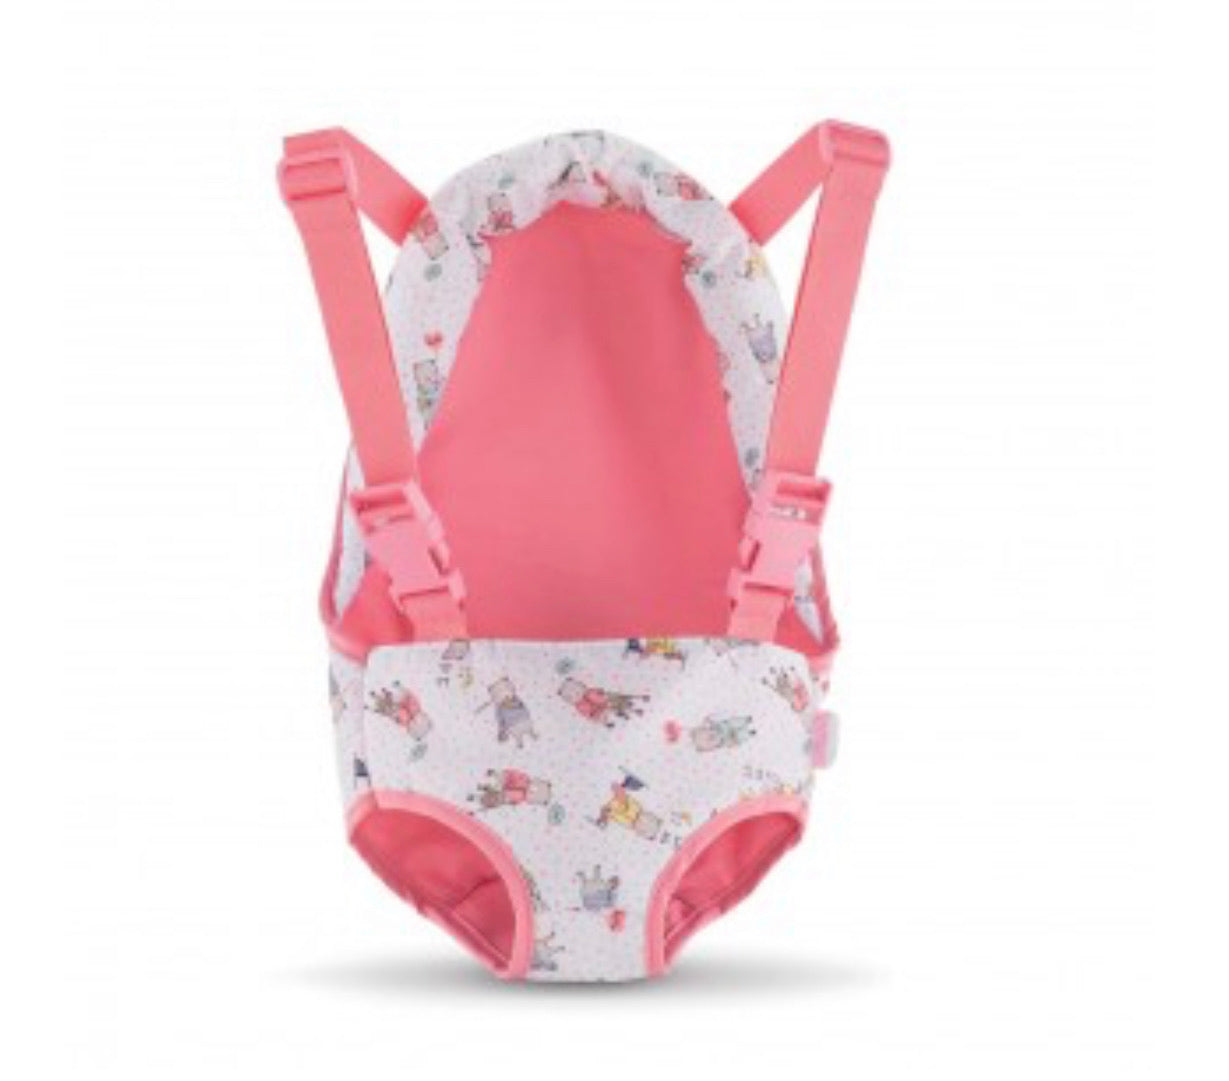 Corolle-baby doll sling for baby doll up to 18” - Einstein's Attic